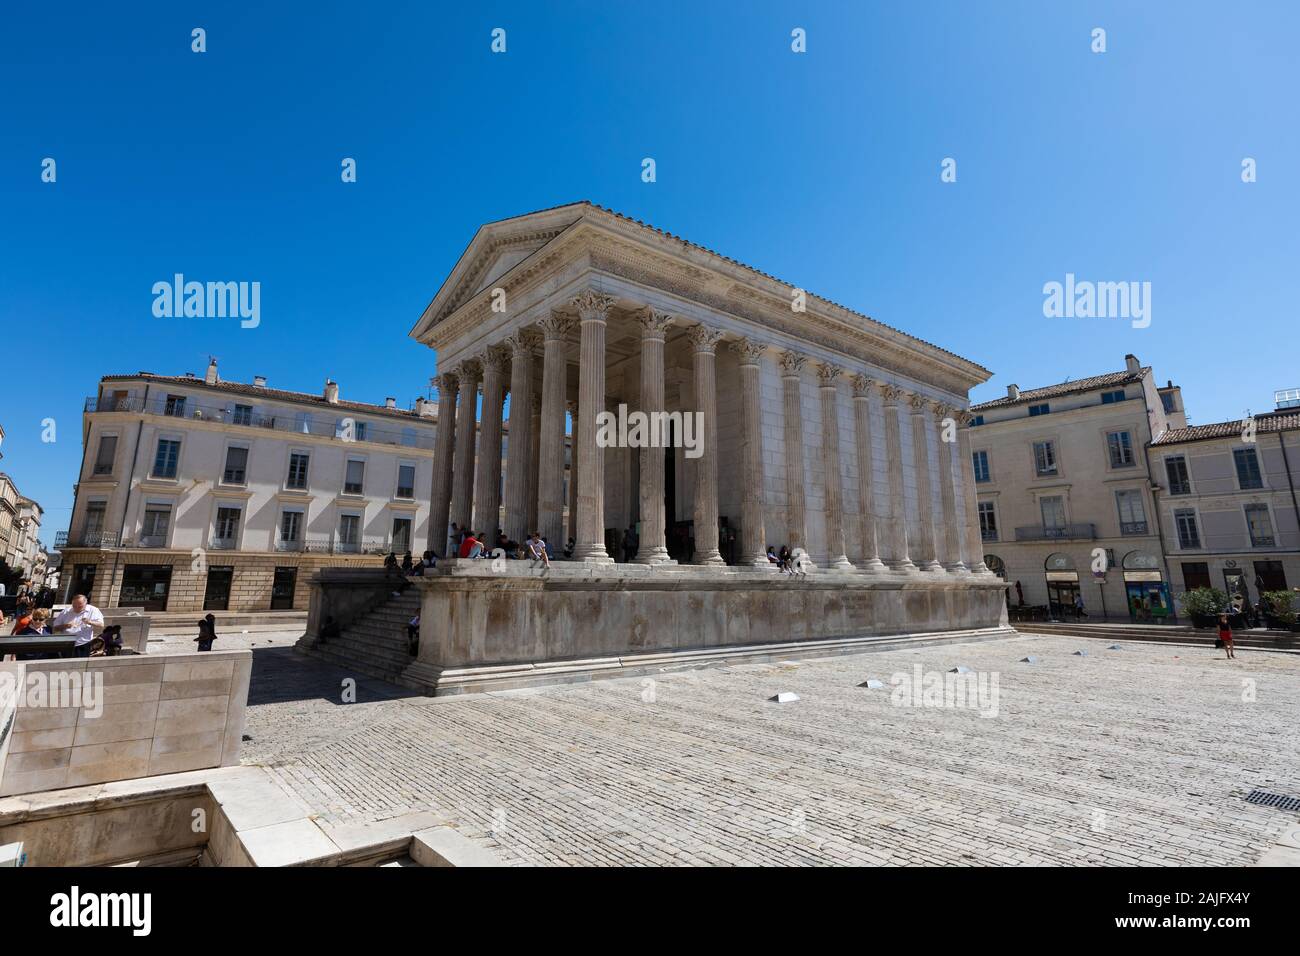 Ancient Roman construction, Maison Carree in the city centre of Nimes, Provence, Southern France Stock Photo